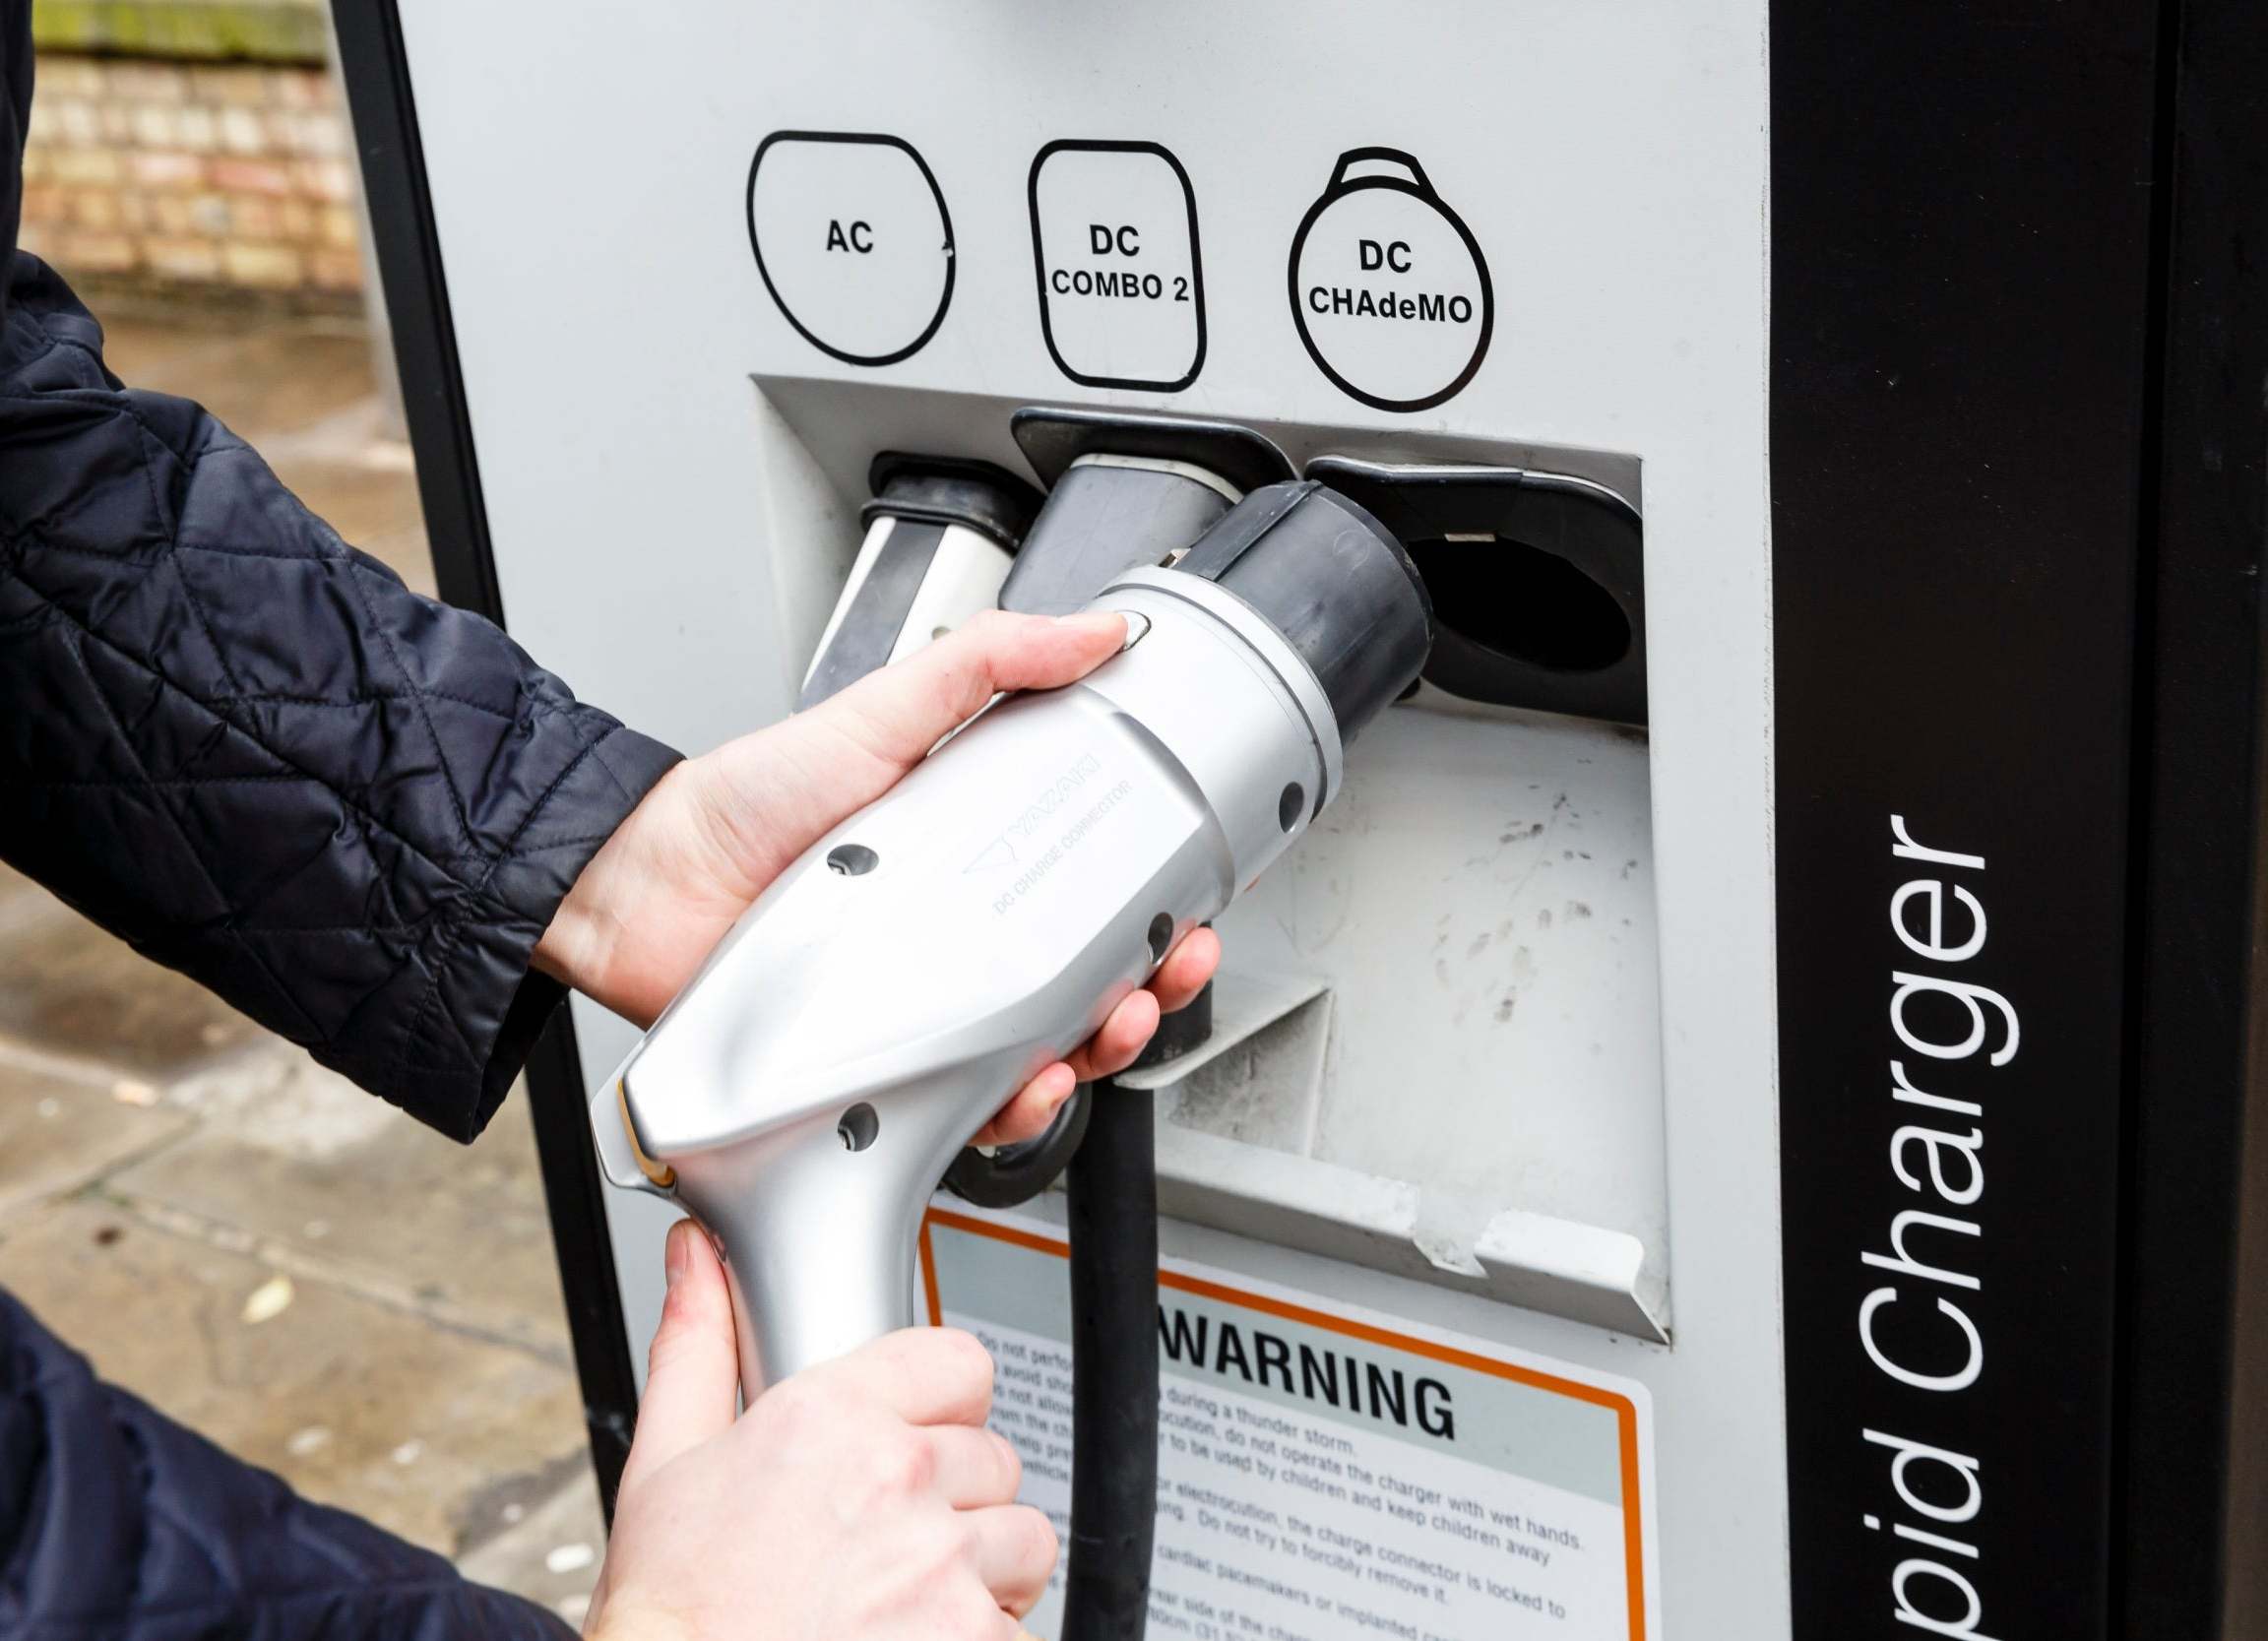 There are currently only 17 hydrogen charging points, compared to the 15,000 electric ones